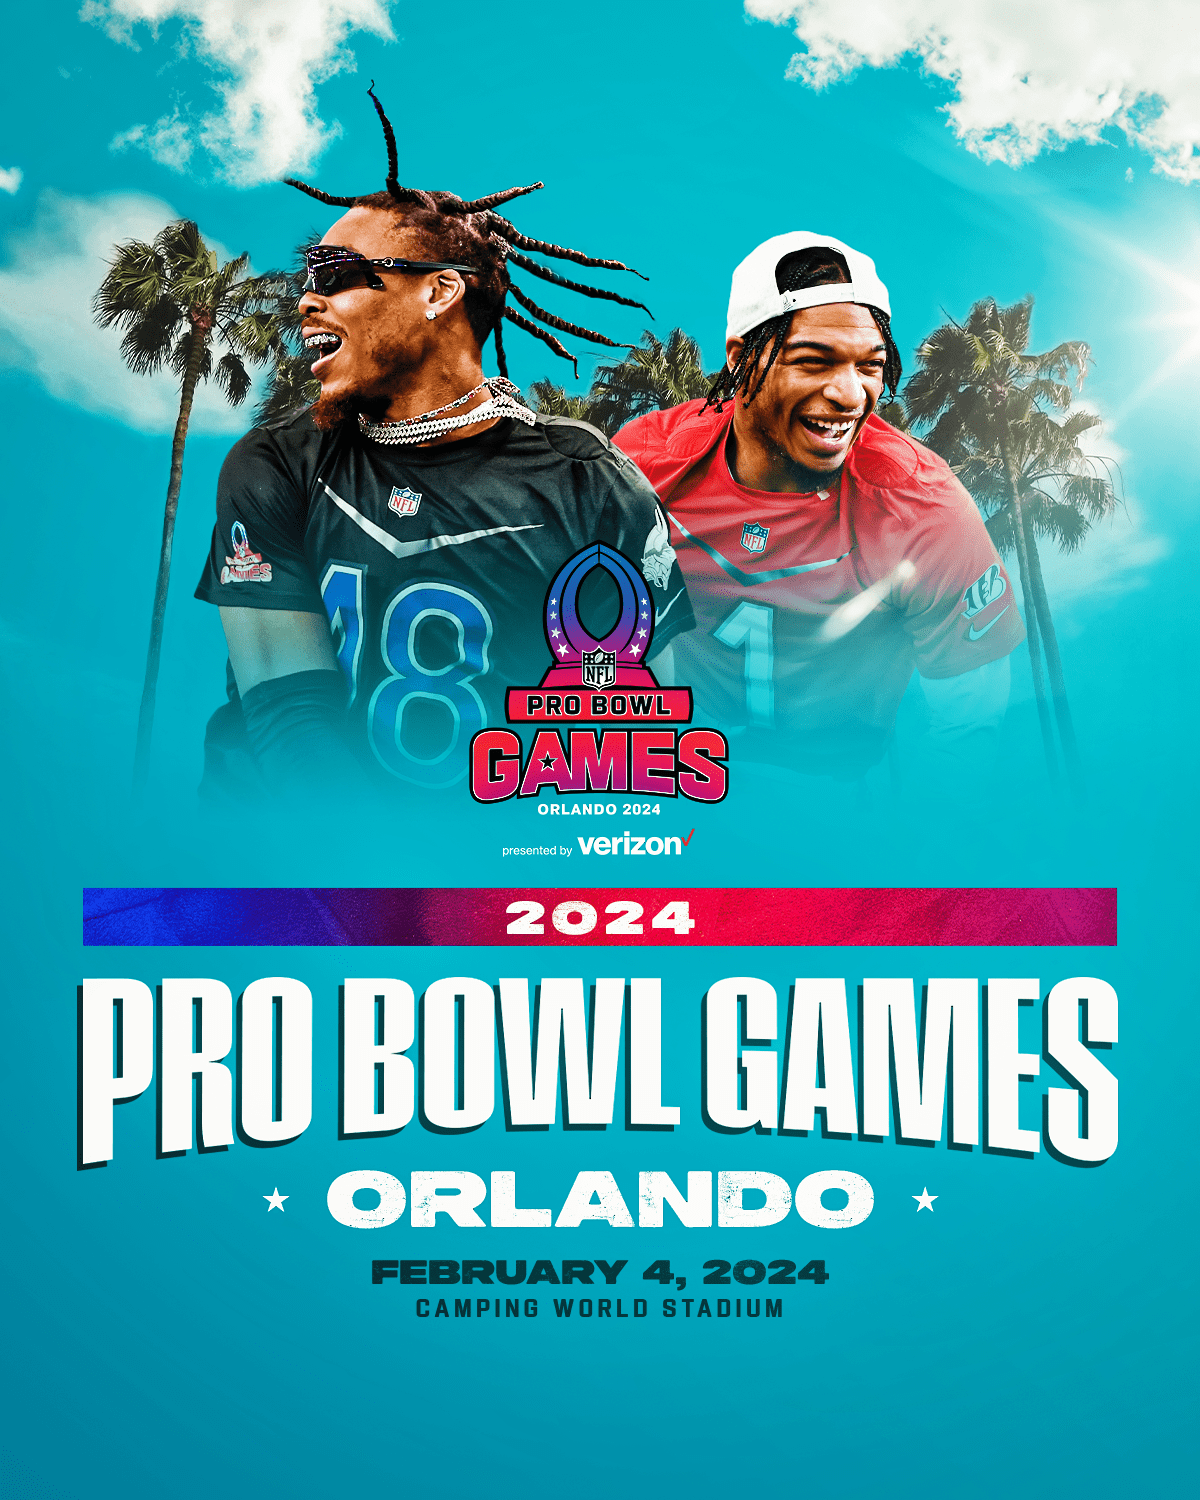 Orlando To Host The 2024 Pro Bowl Games